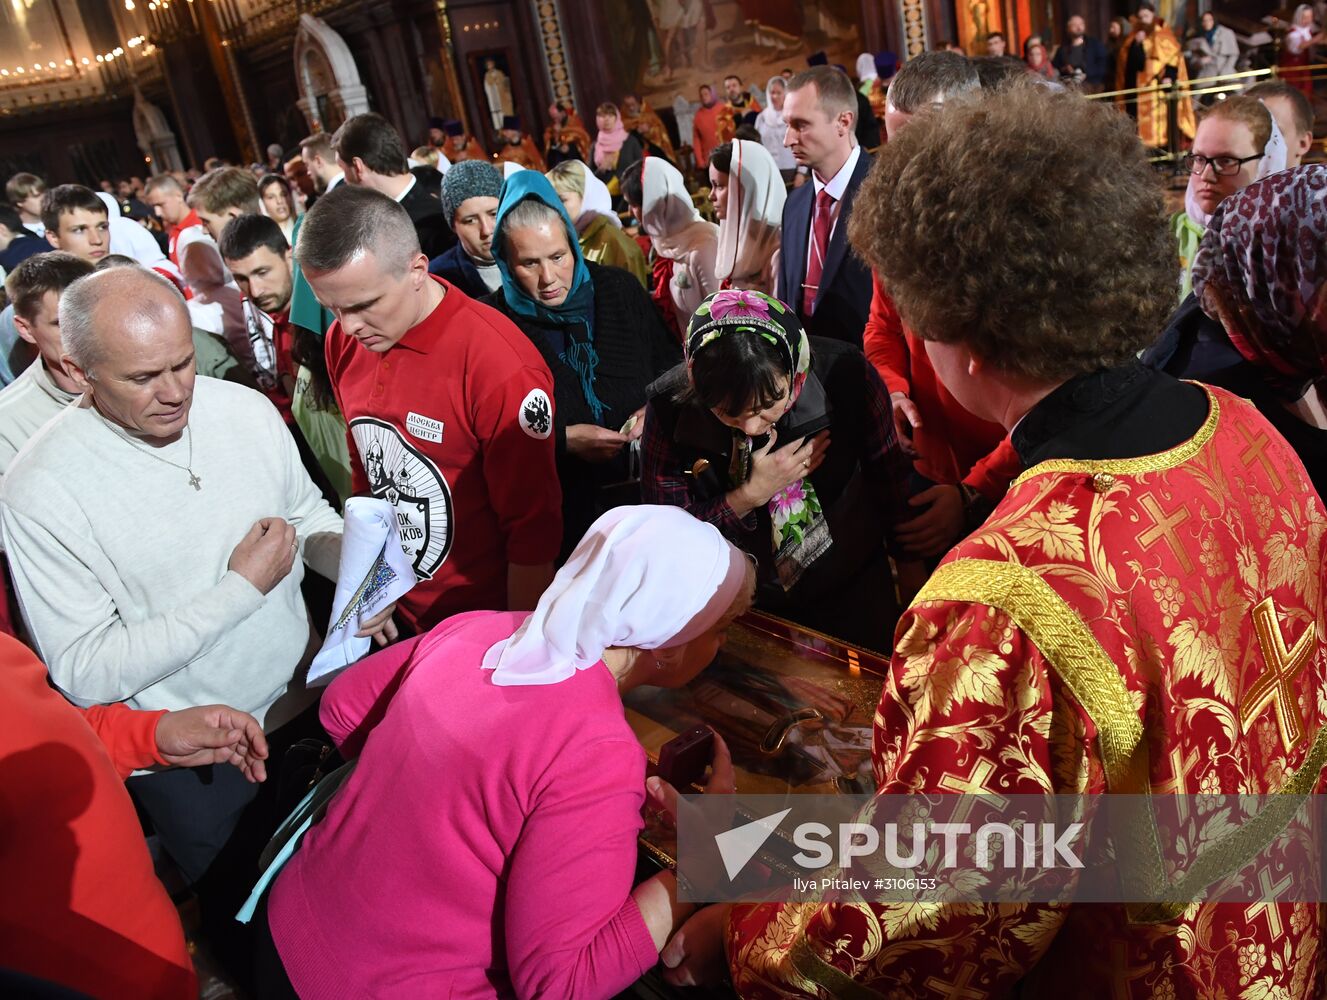 Saint Nicholas relics welcoming ceremony at Christ the Savior Cathedral